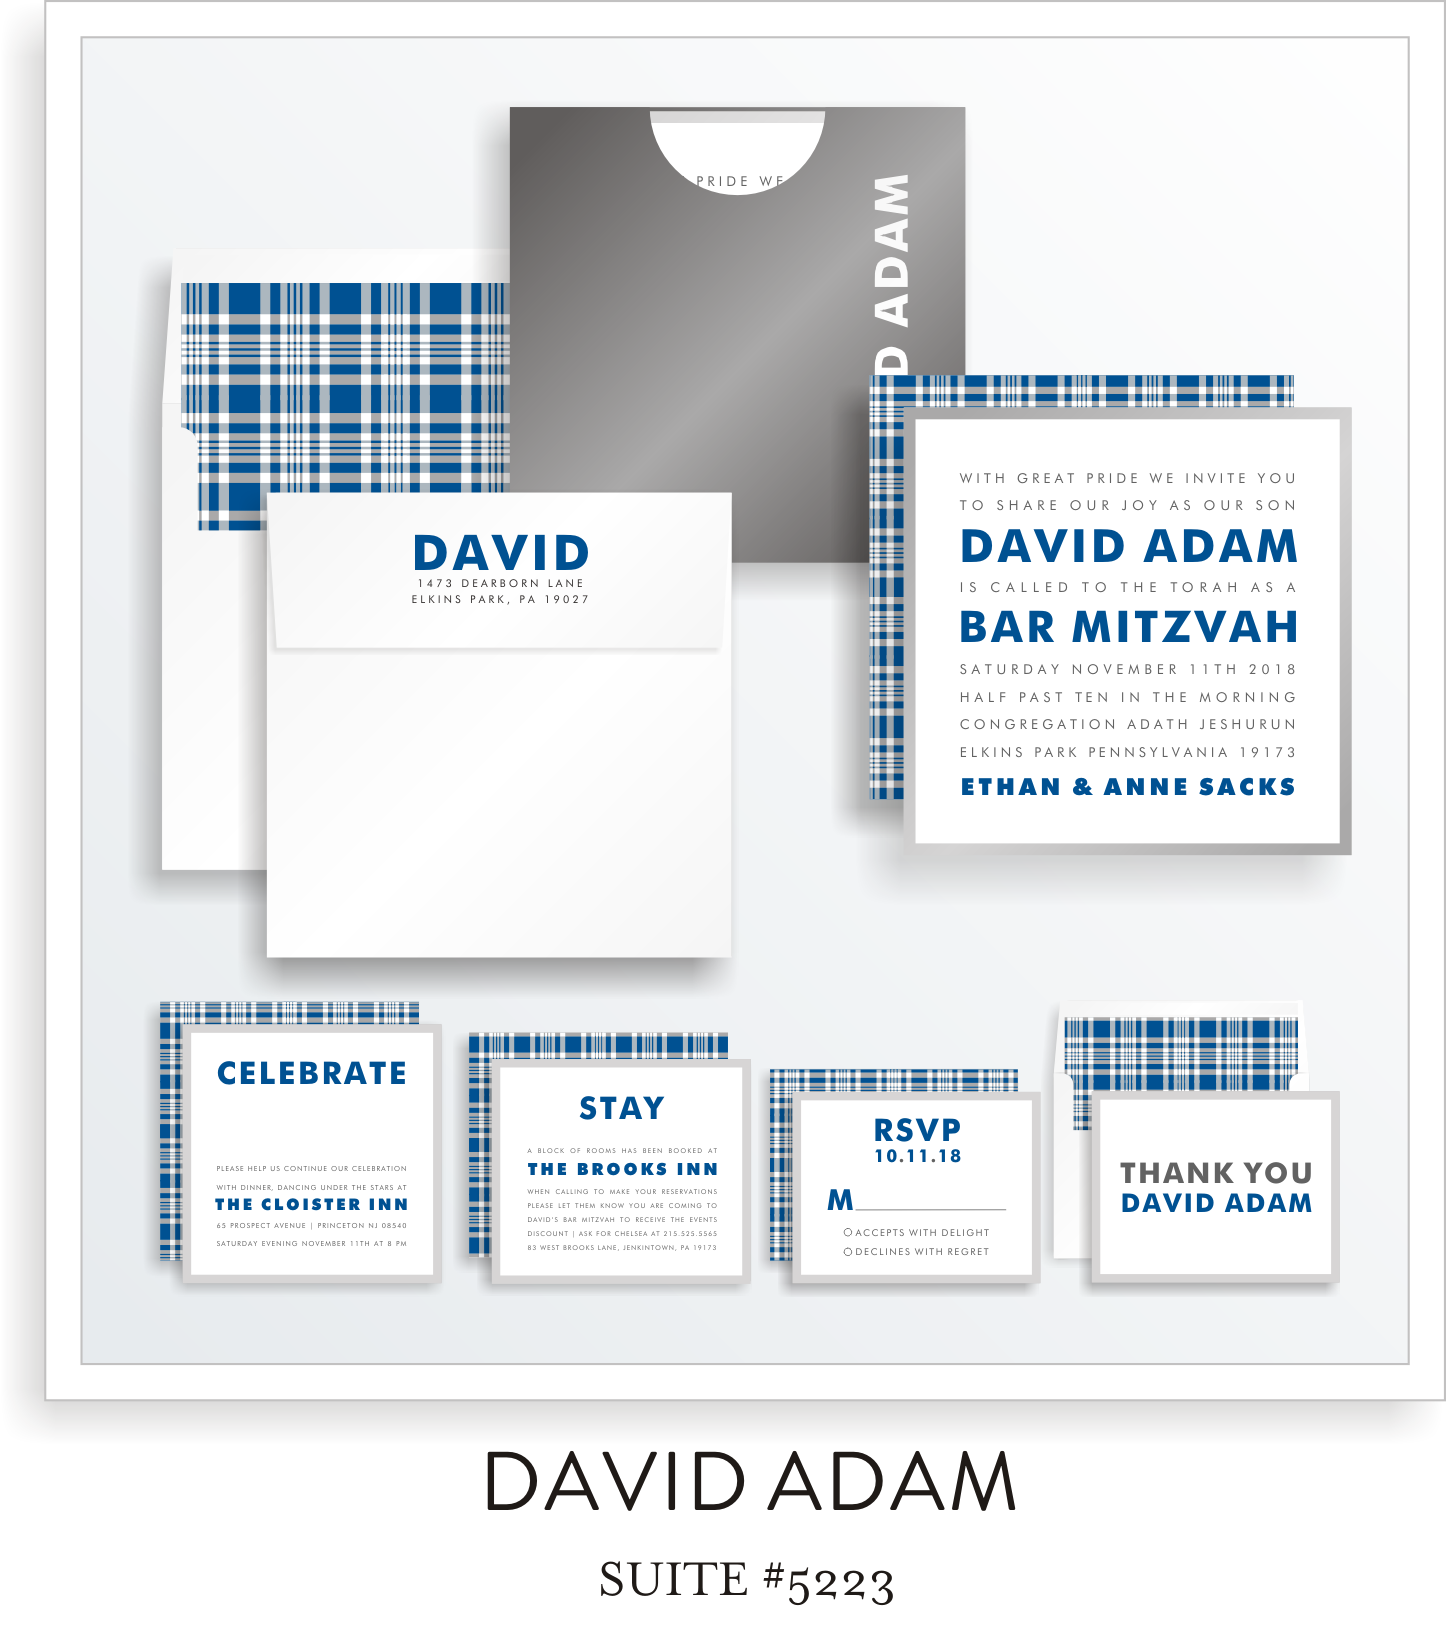 Copy of Copy of <a href=/bar-mitzvah-invitations-5223>Suite Details→</a><strong><a href=/david-adam-in-colors>see more colors→</a></strong>